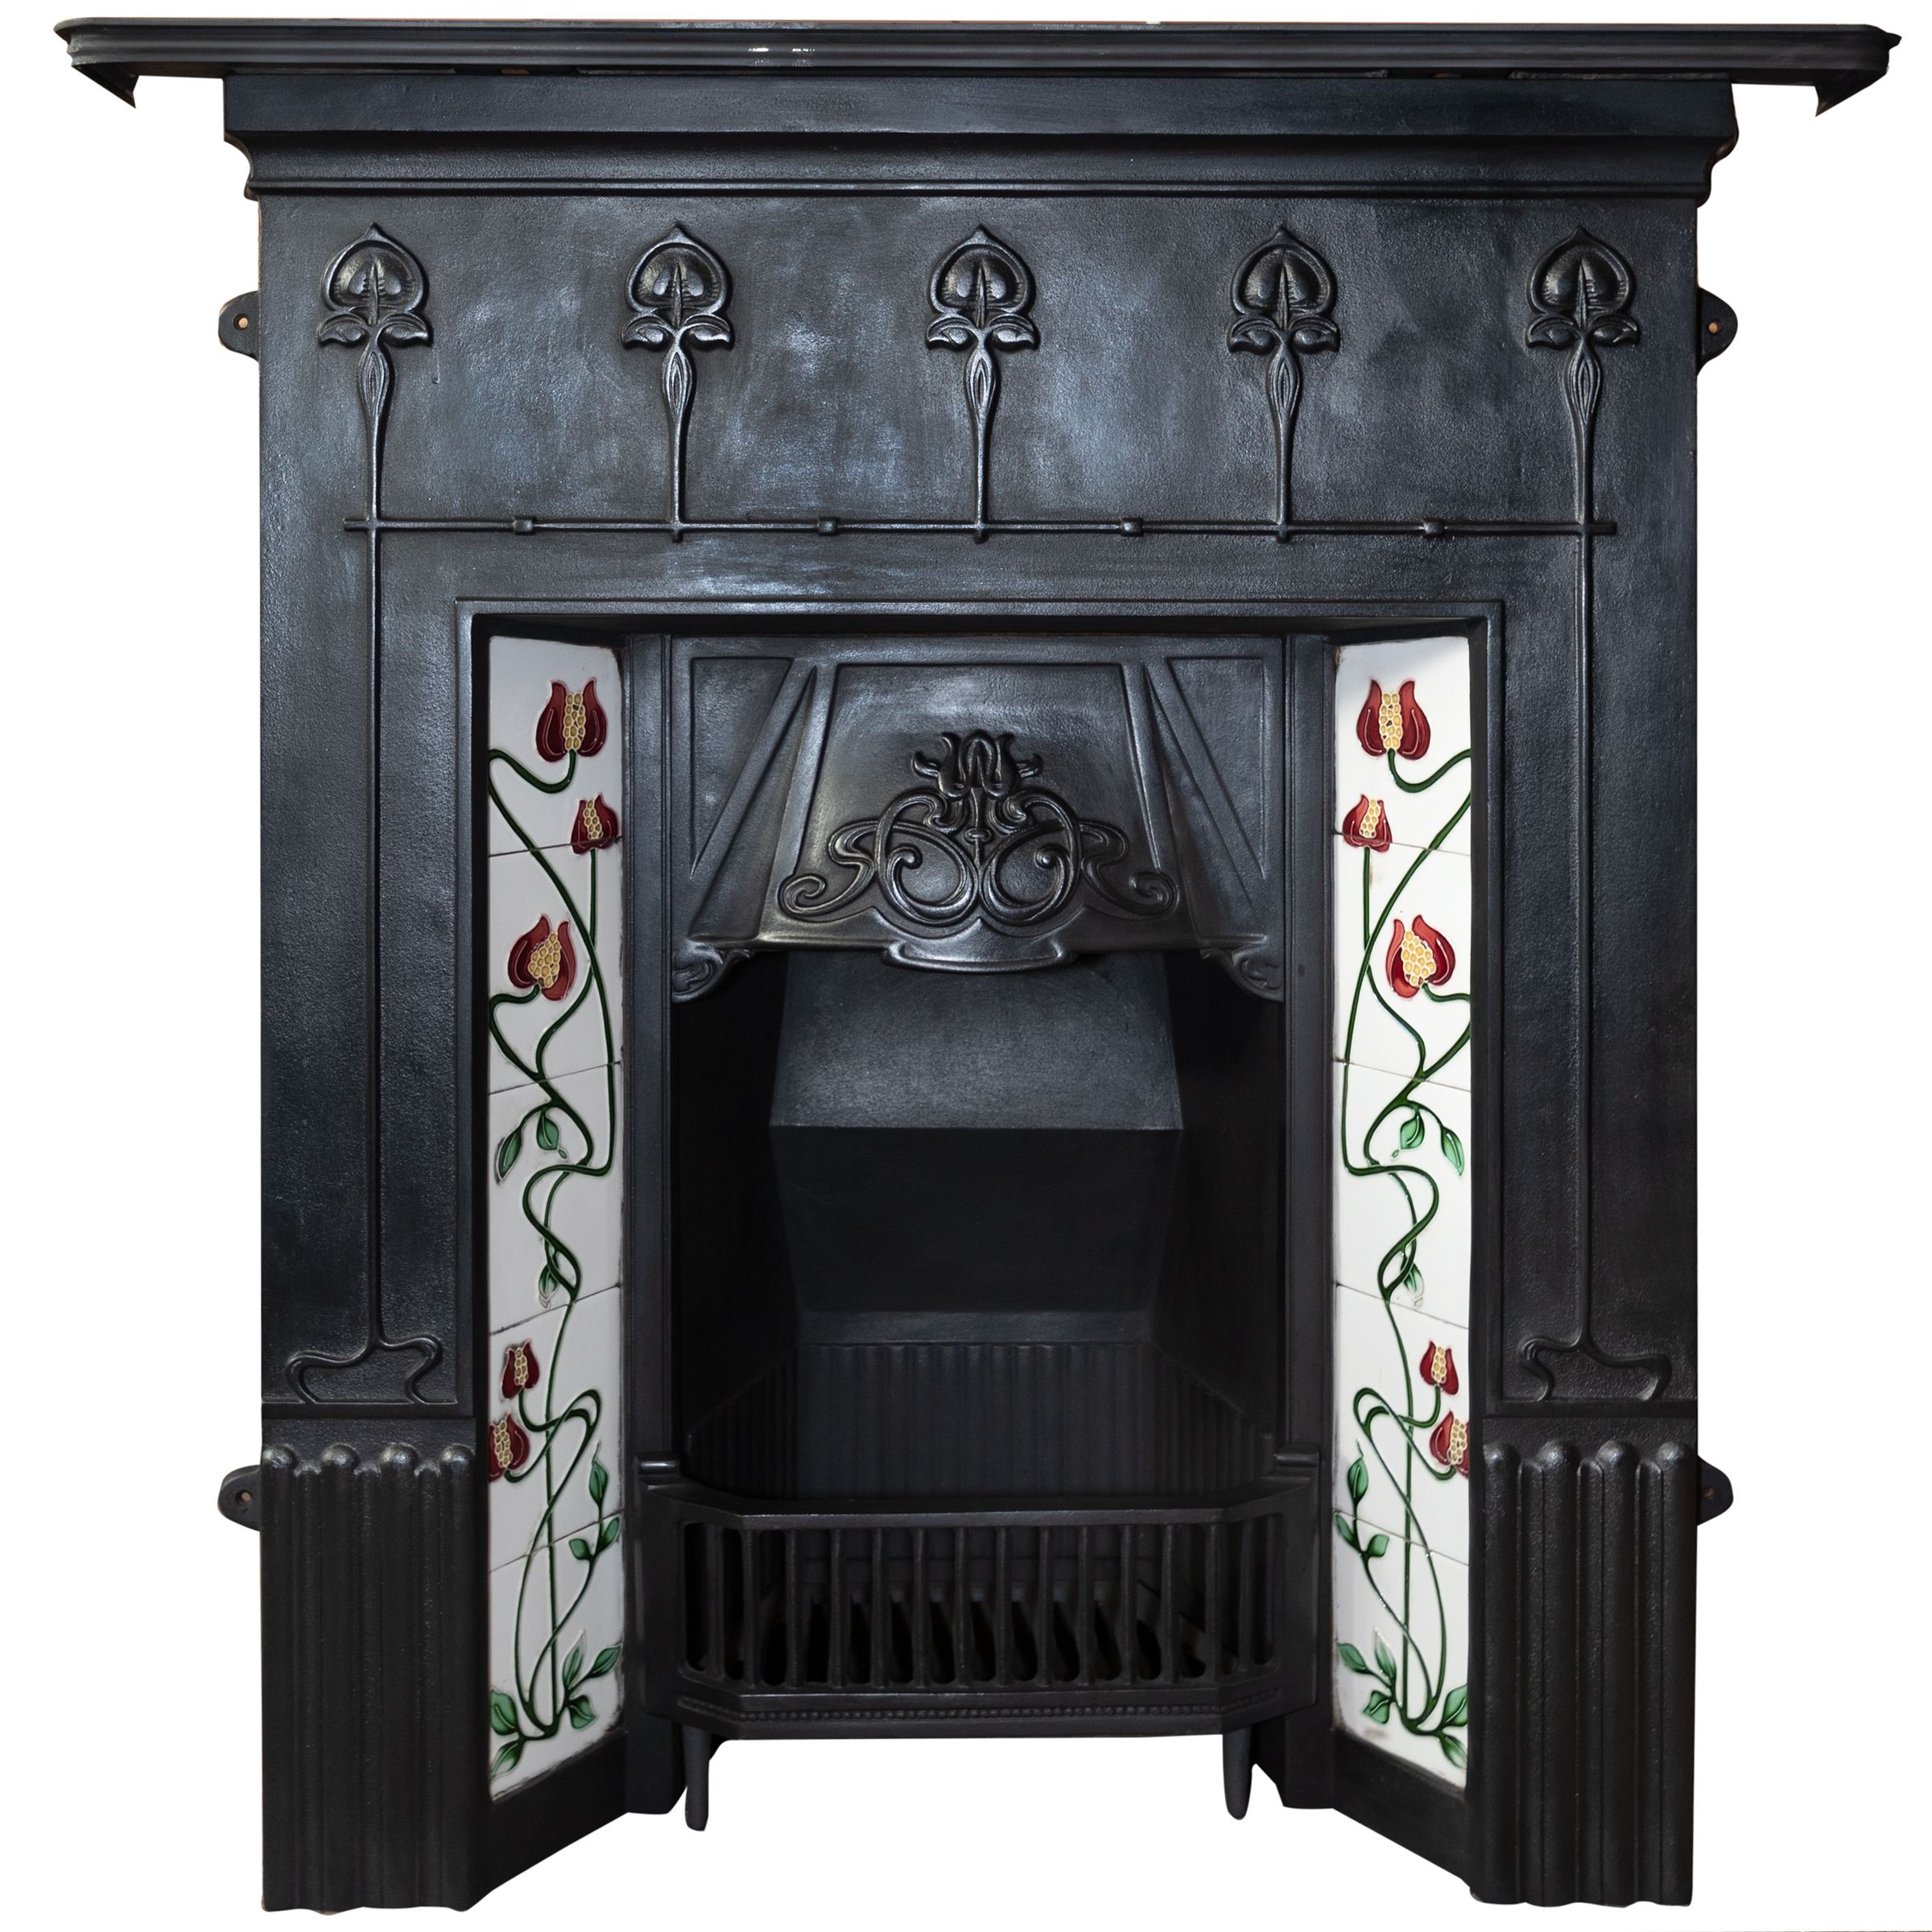 Wrought Iron Fireplace Grate Best Of Huge Selection Of Antique Cast Iron Fireplaces Fully